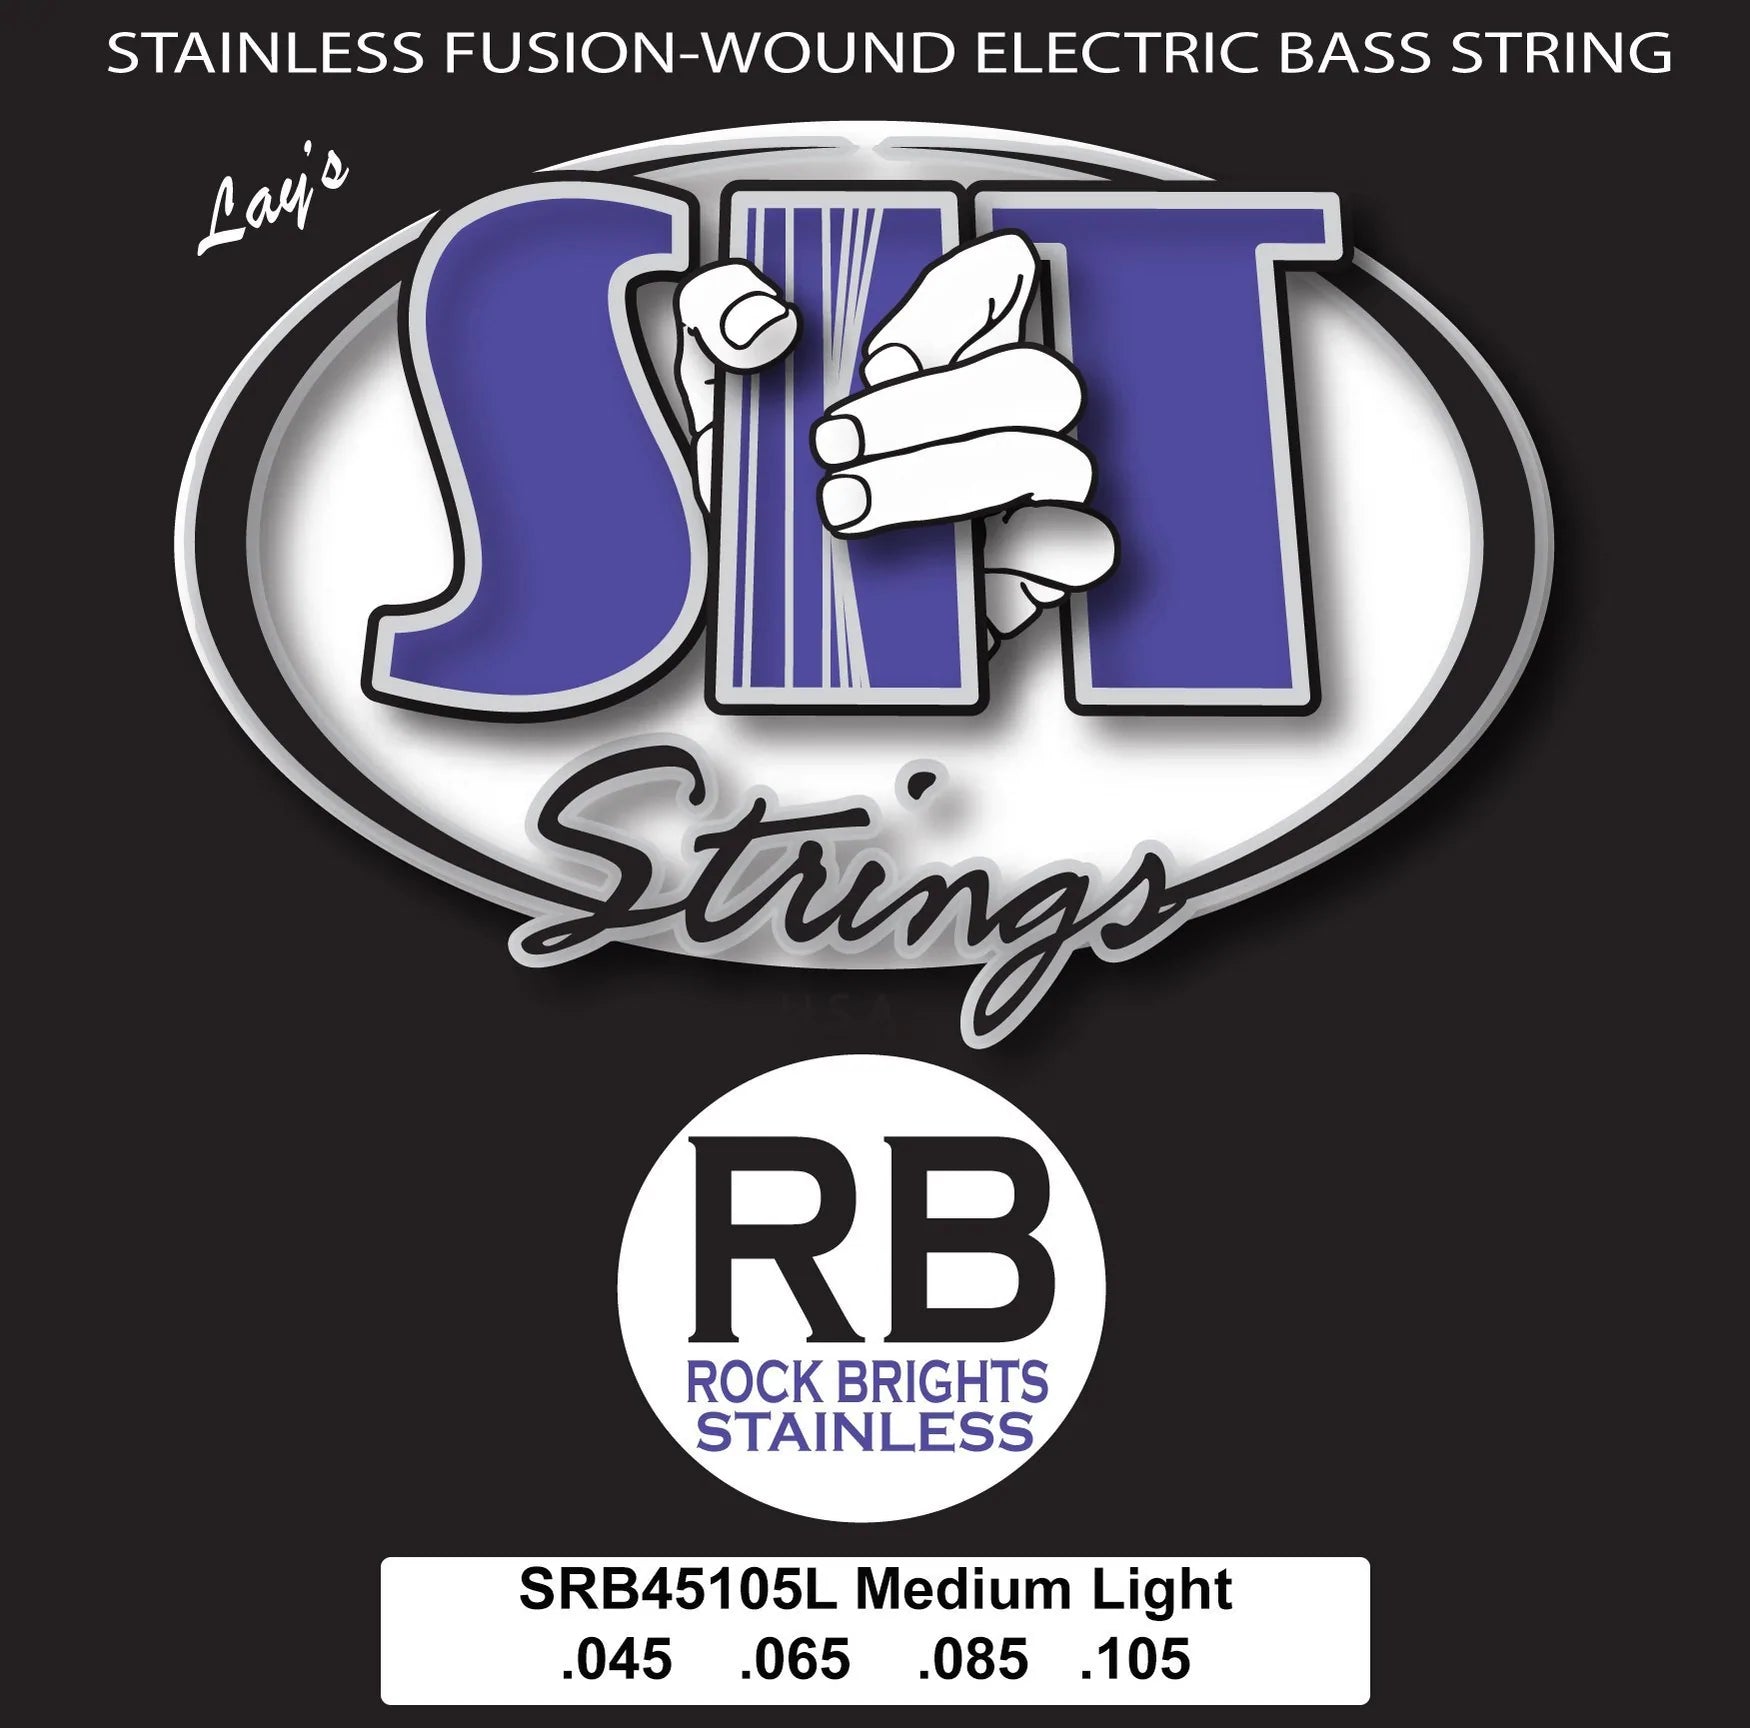 SIT ROCK BRIGHT STAINLESS STEEL BASS - HIENDGUITAR SRB45105L MEDIUM LIGHT SRB45105L MEDIUM LIGHT SIT Bass Strings